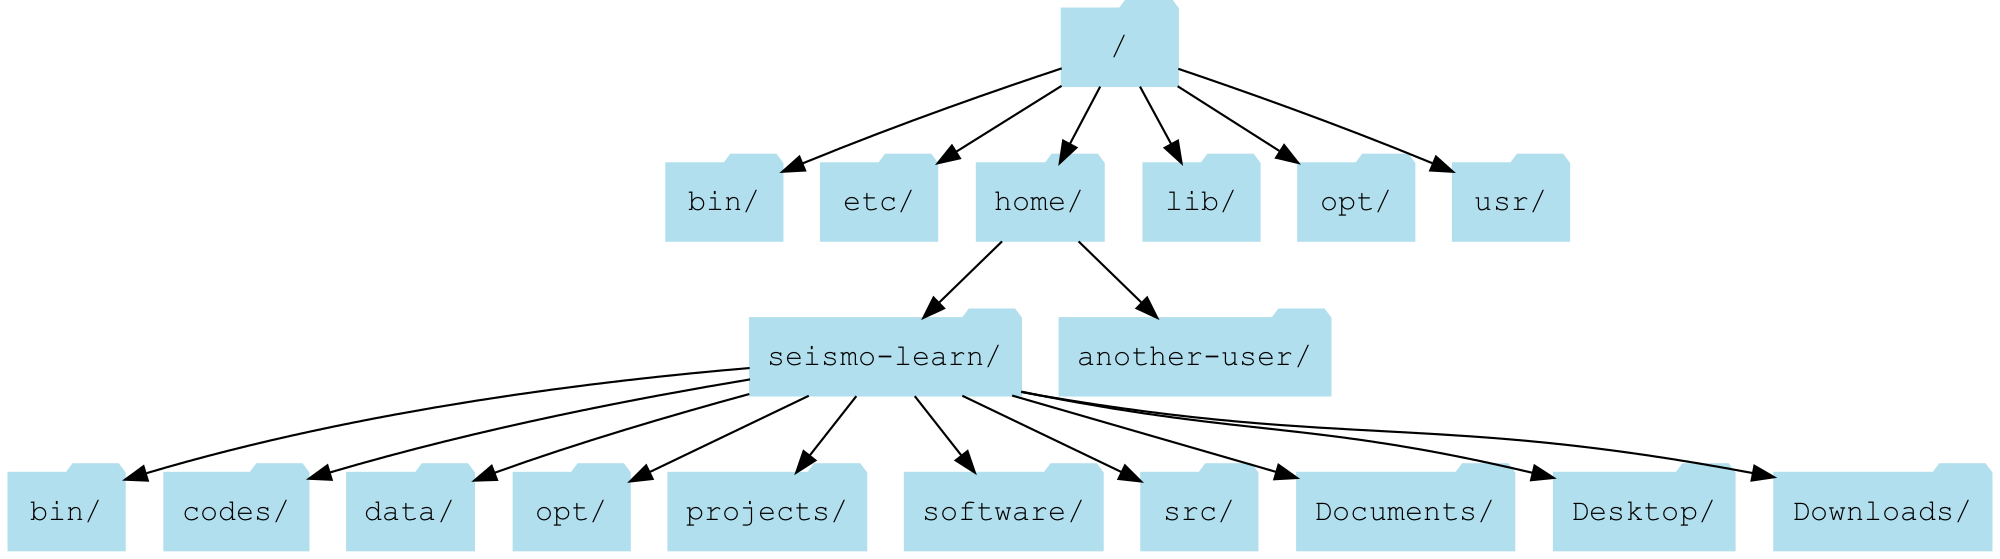 ../../_images/linux-file-system-tree.png